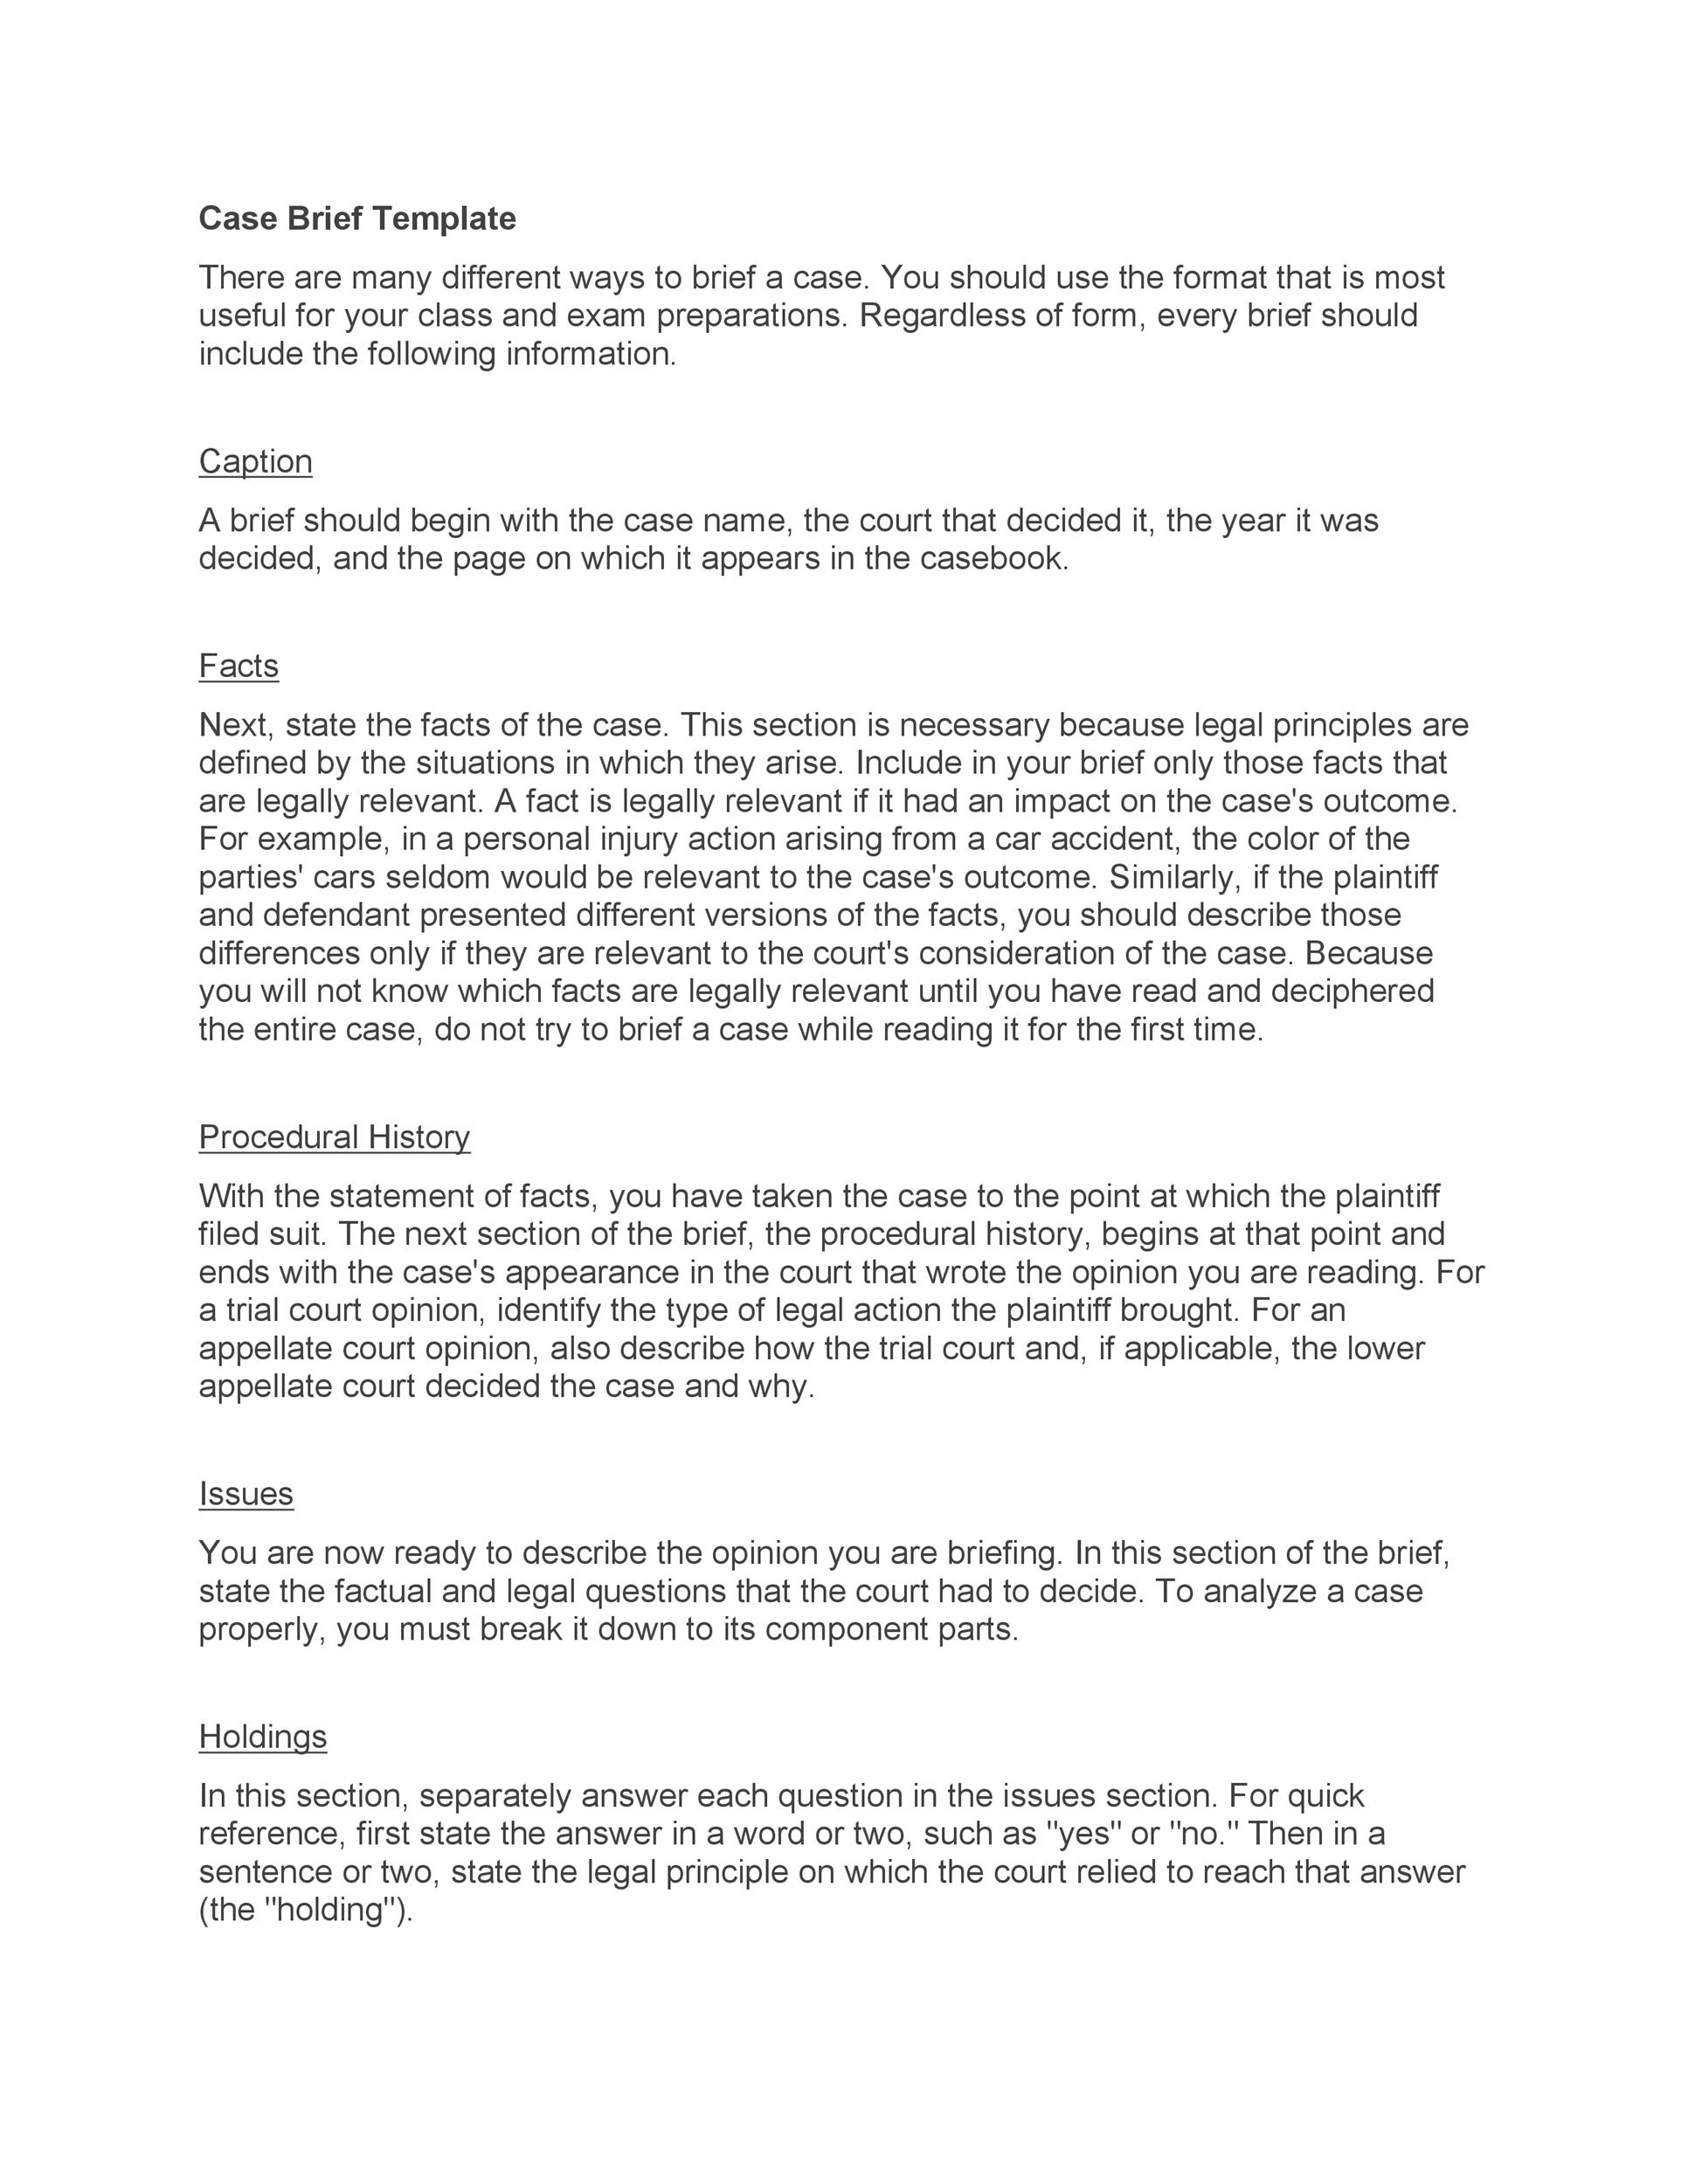 Case Brief Template from templatelab.com